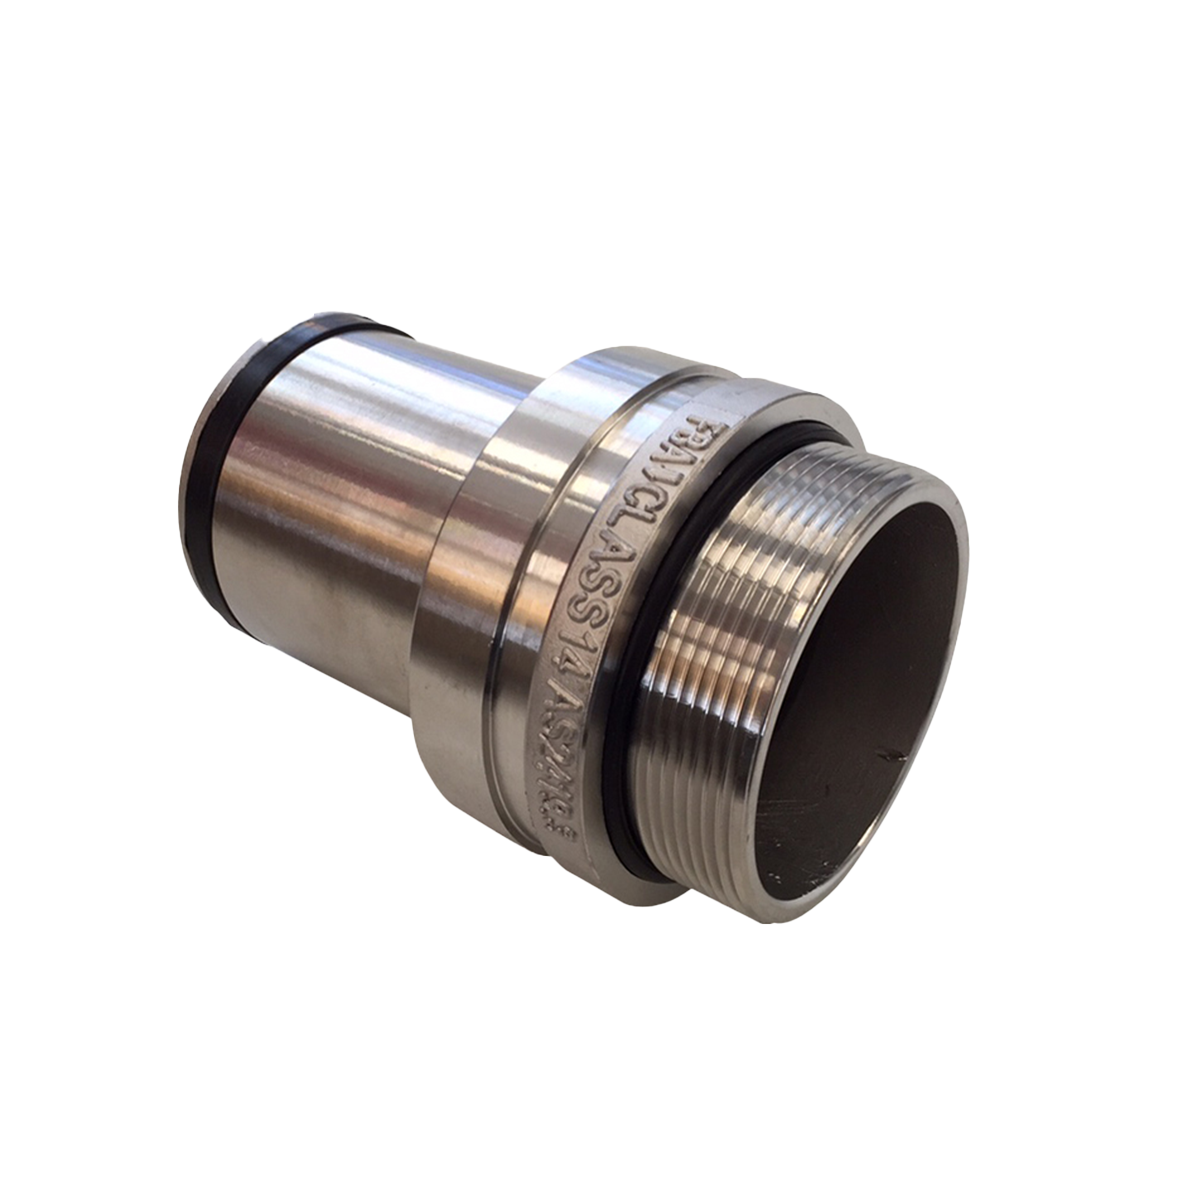 65mm BSP/80mm roll grooved Single Point Booster, Suits NSW,VIC,SA,TAS,ACT - Premium NSW Type, TAS Type, ACT Type from Wolf - Shop now at Firebox Australia